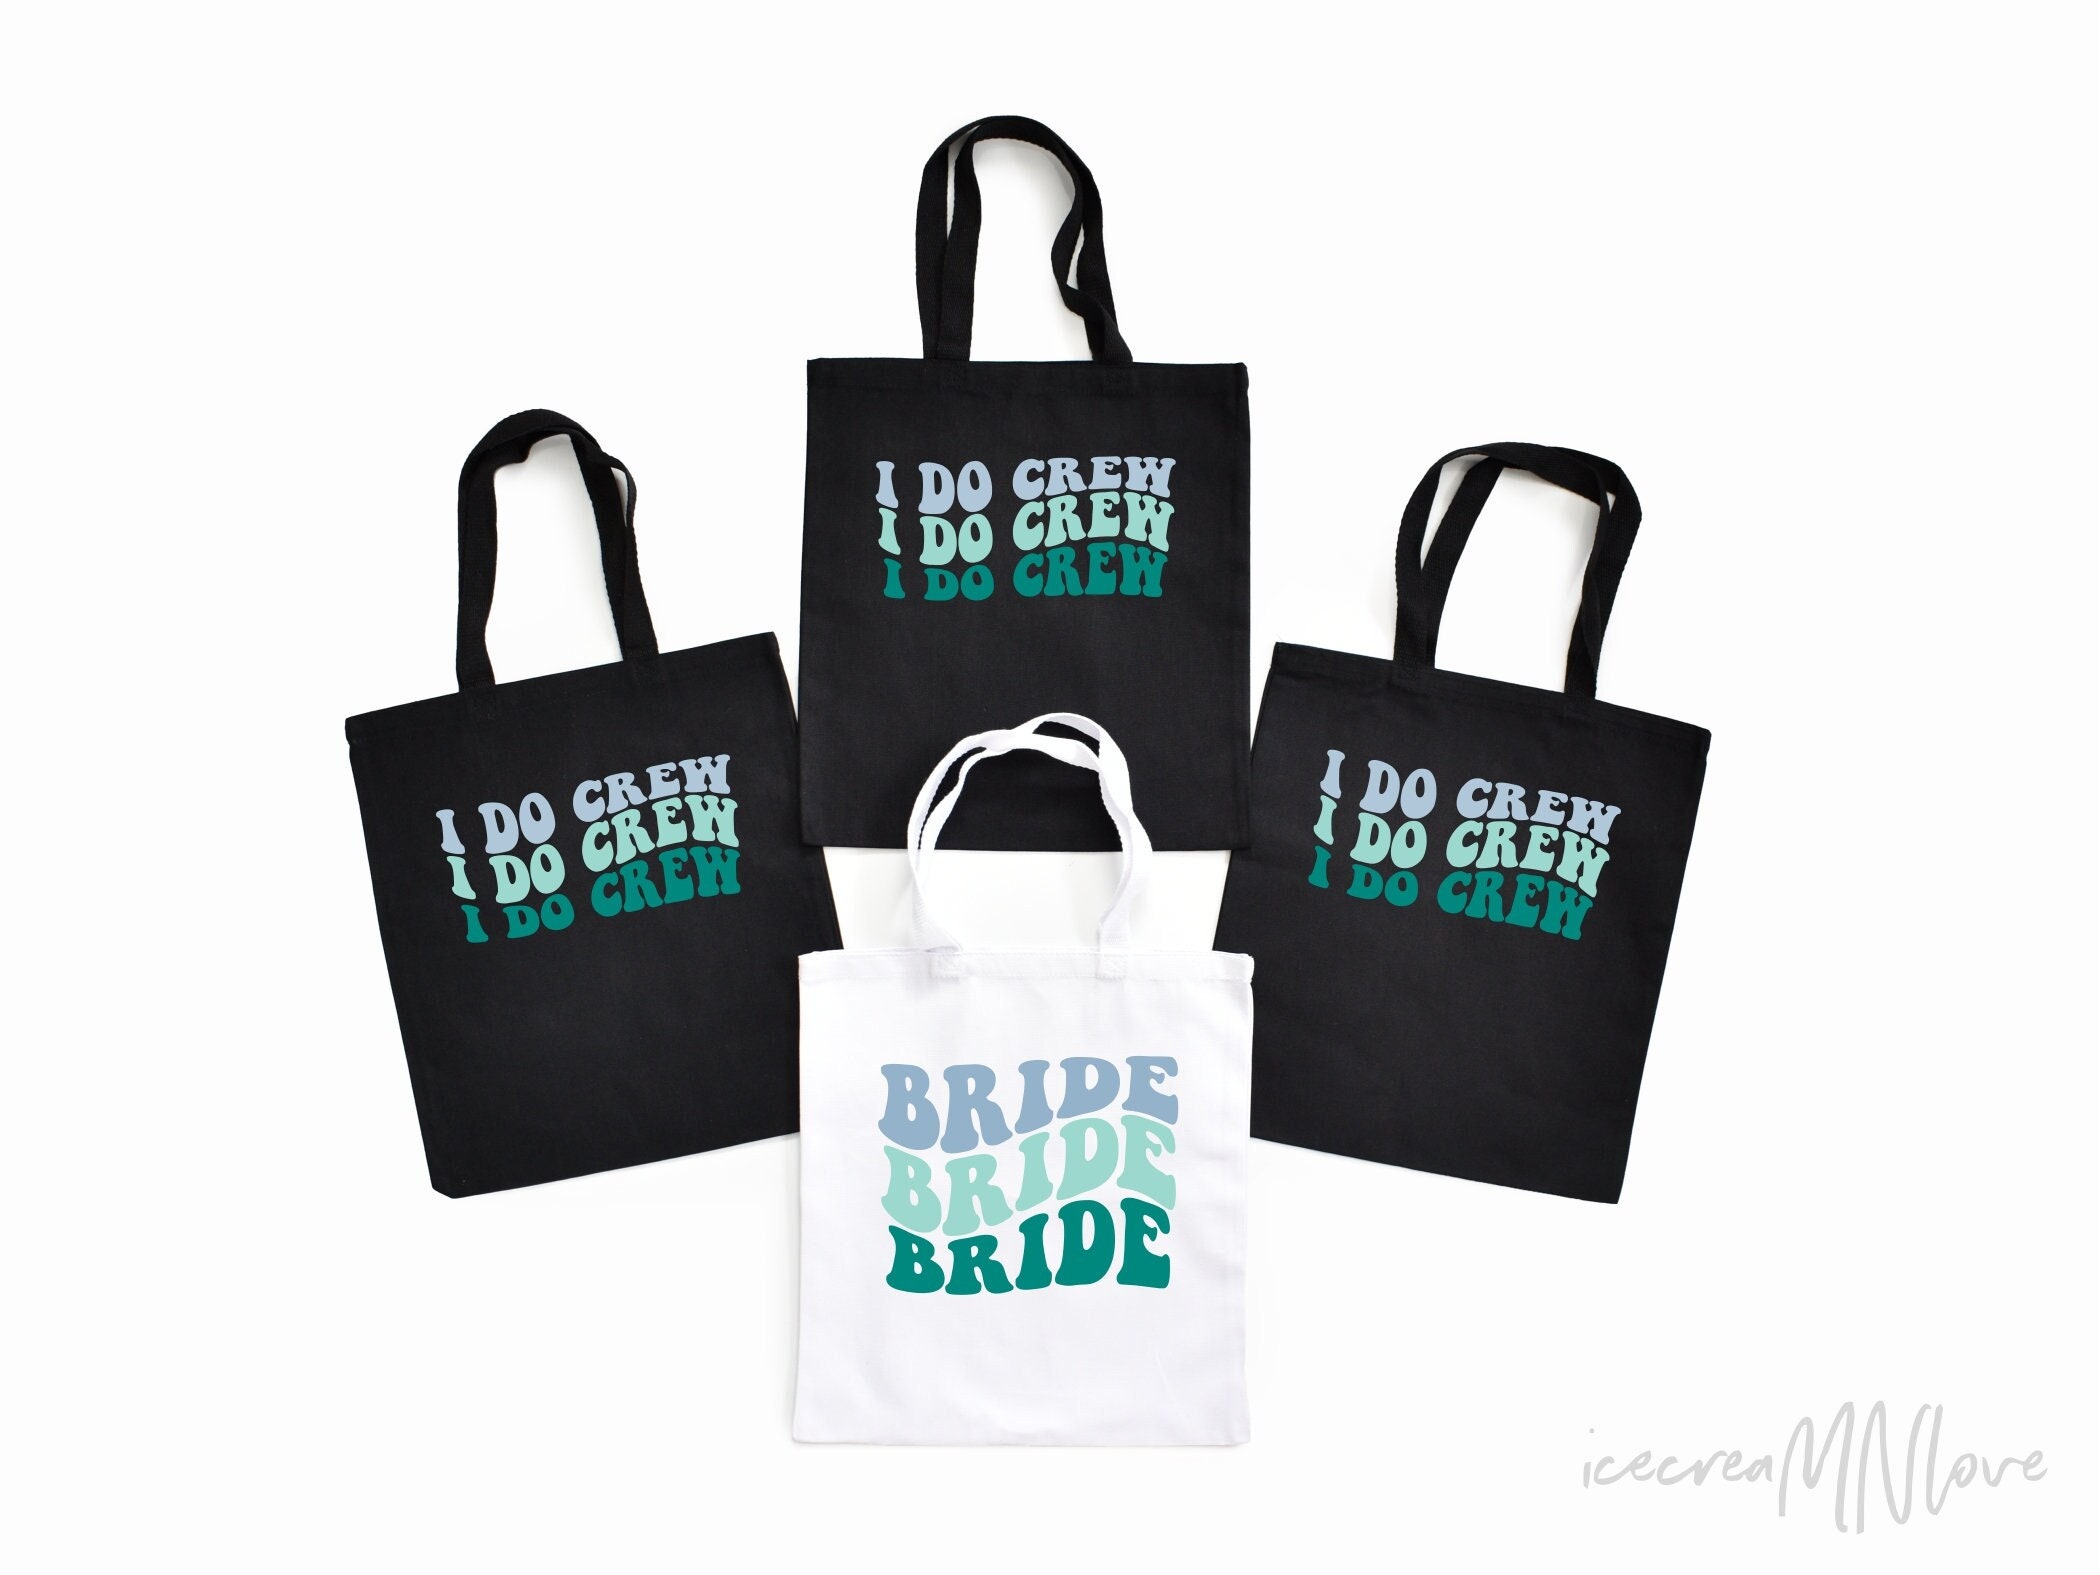 CHENGU 8 Pieces Bridesmaid Gift Bags I Do Crew Bachelorette Bags Bridesmaid  Gifts for Wedding Day Bachelorette Party Bridal Party Favor Team Bride